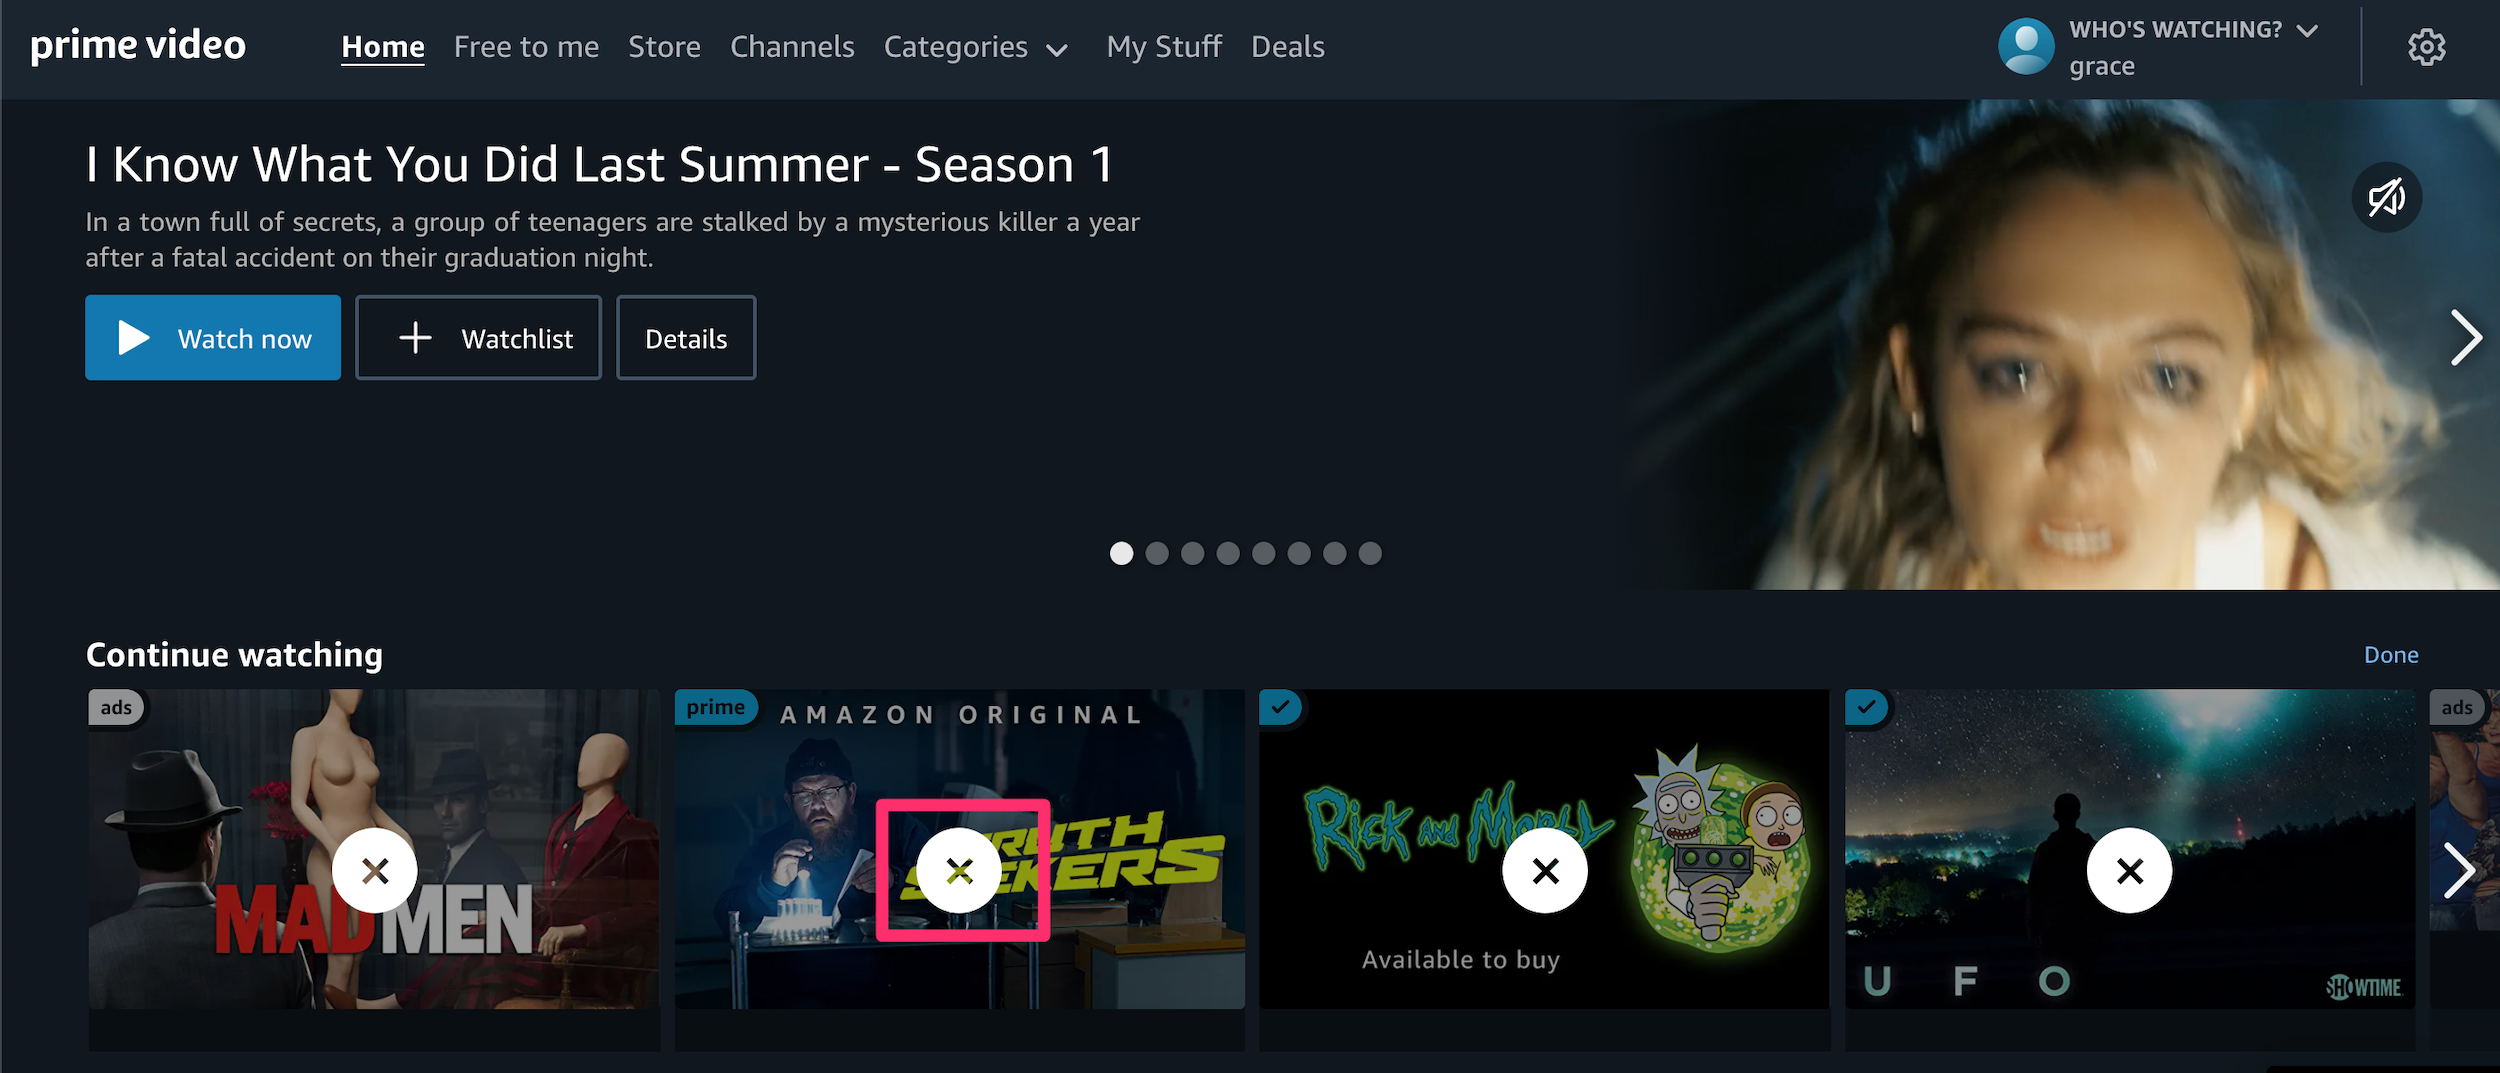 Screenshot of Continue Watching carousel on Prime Video with "X" button highlighted